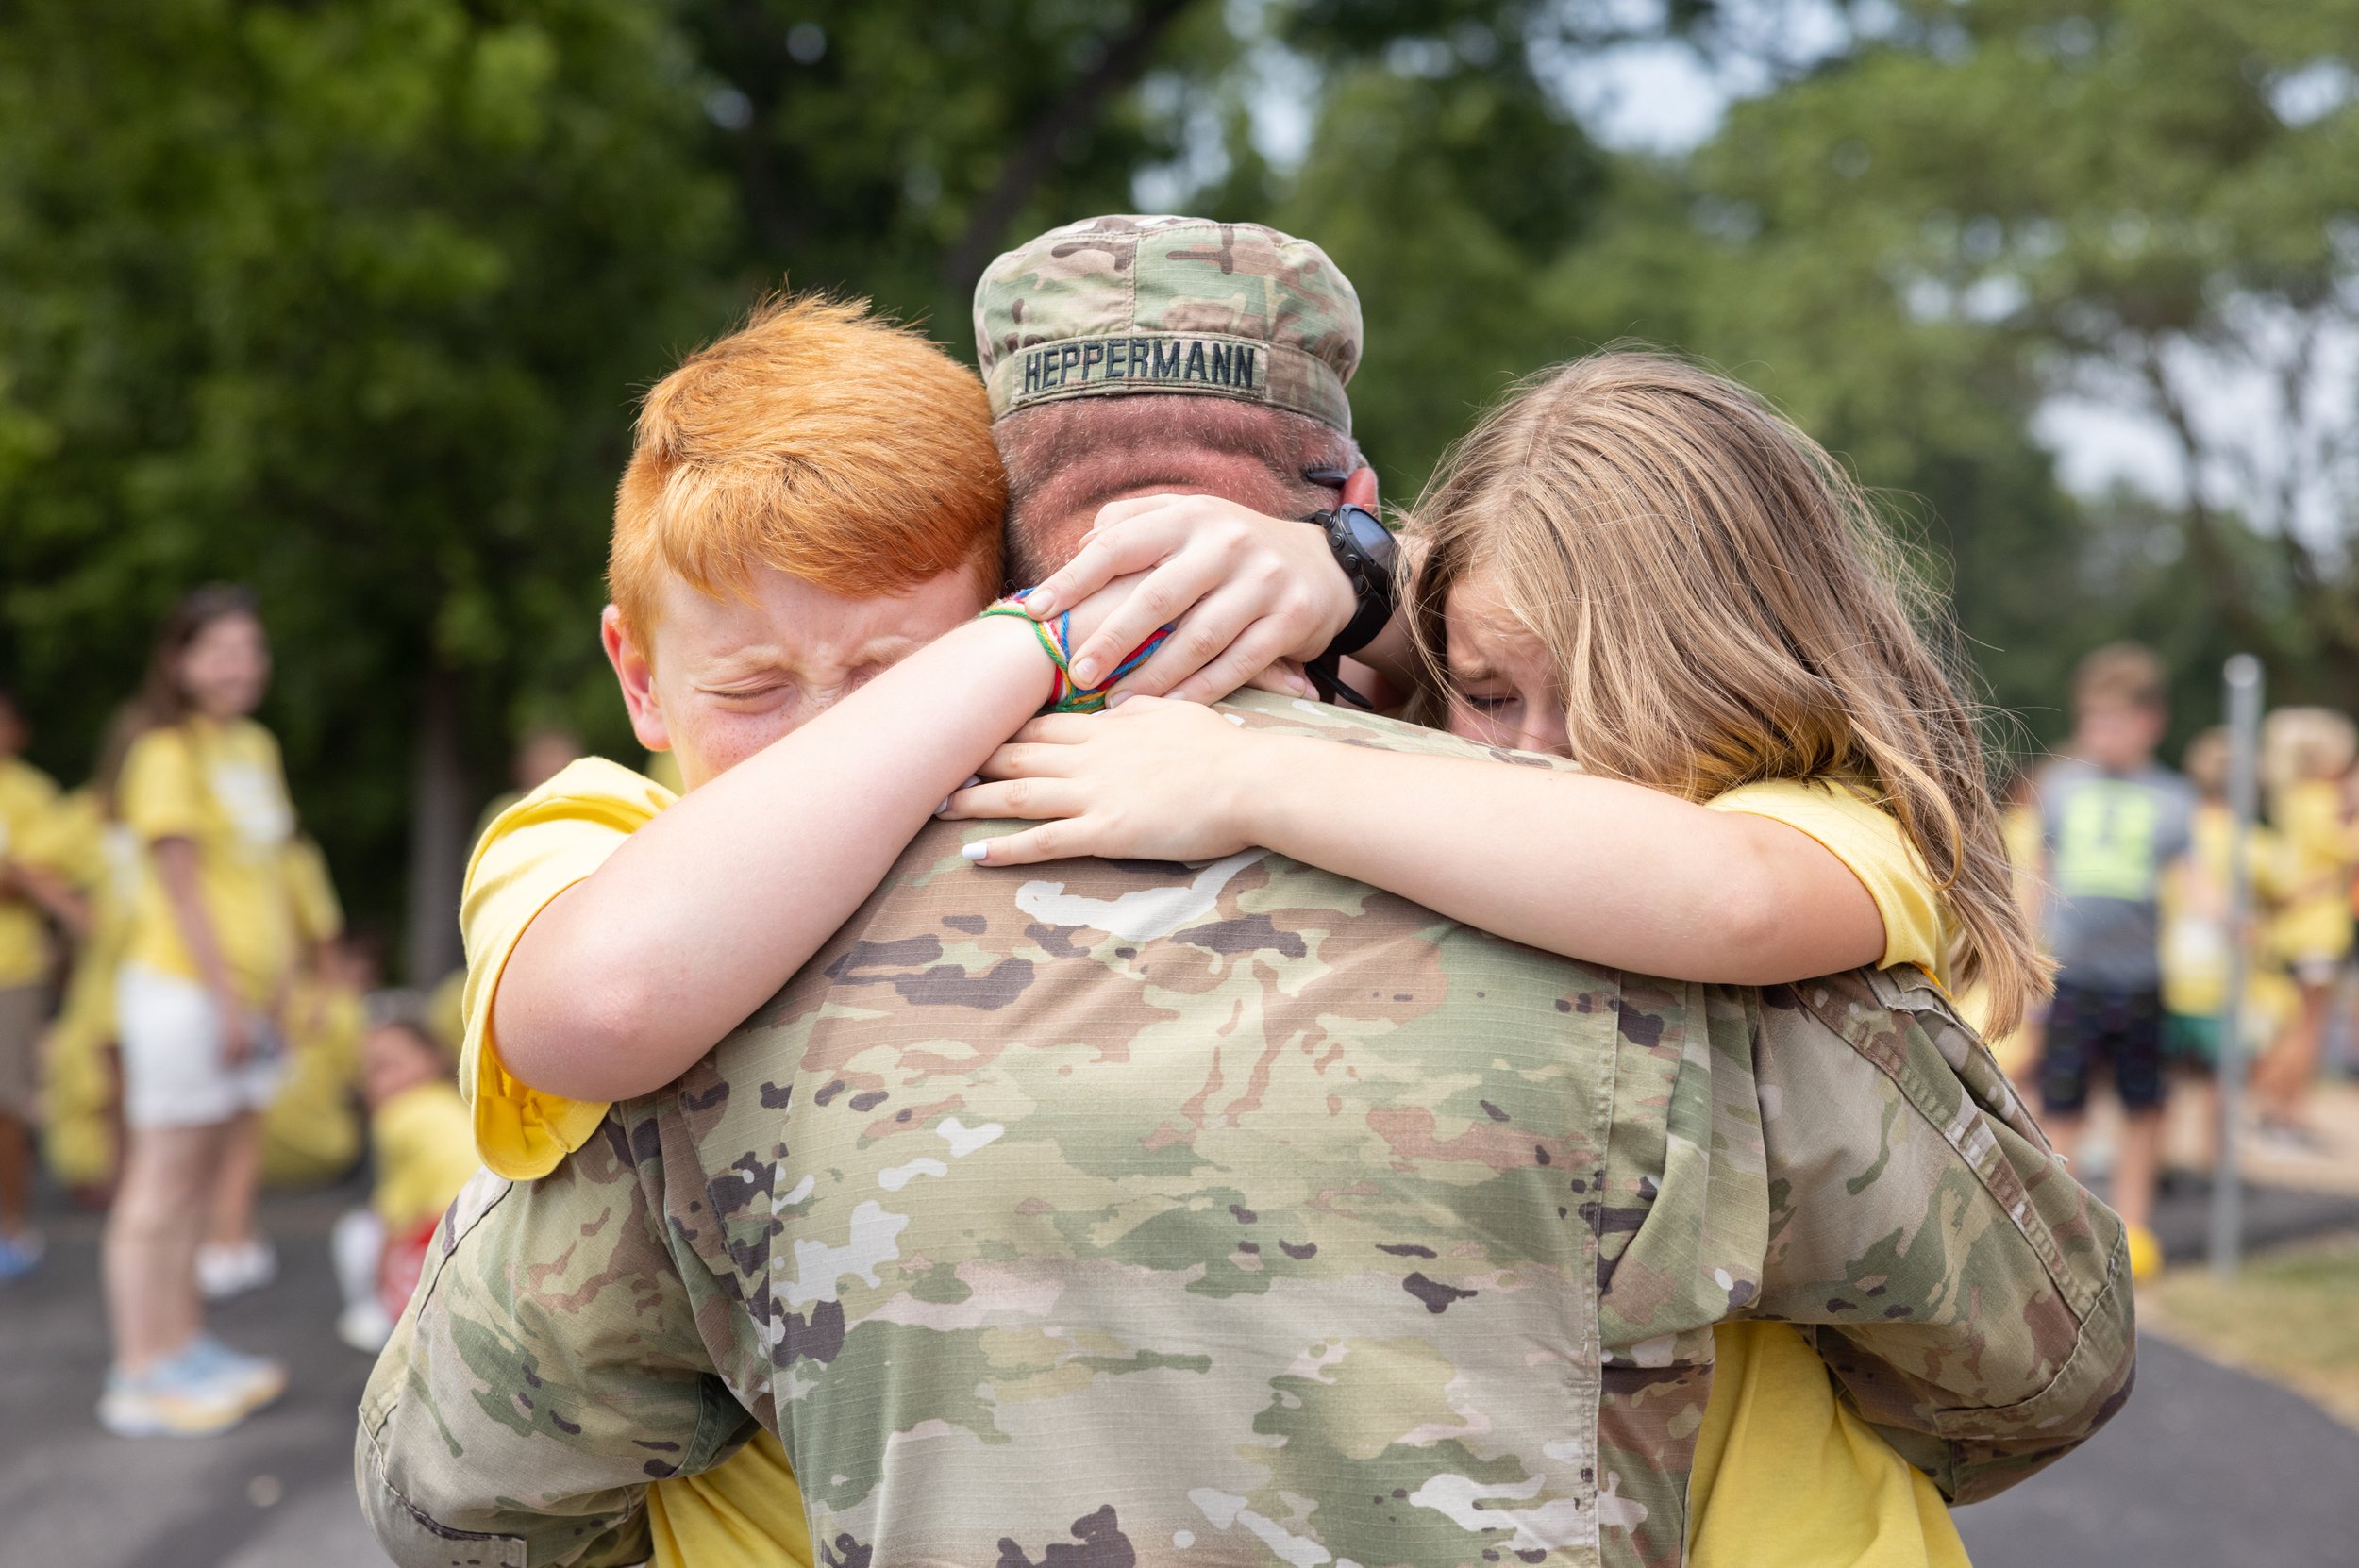  Surprising his children with his return from deployment in Kuwait, U.S. Army SFC Anthony Heppermann was hugged by his children David, 11, and Hailey, 9, during their Totus Tuus summer youth program June 30 at St. Theodore Parish in Flint Hill, Misso